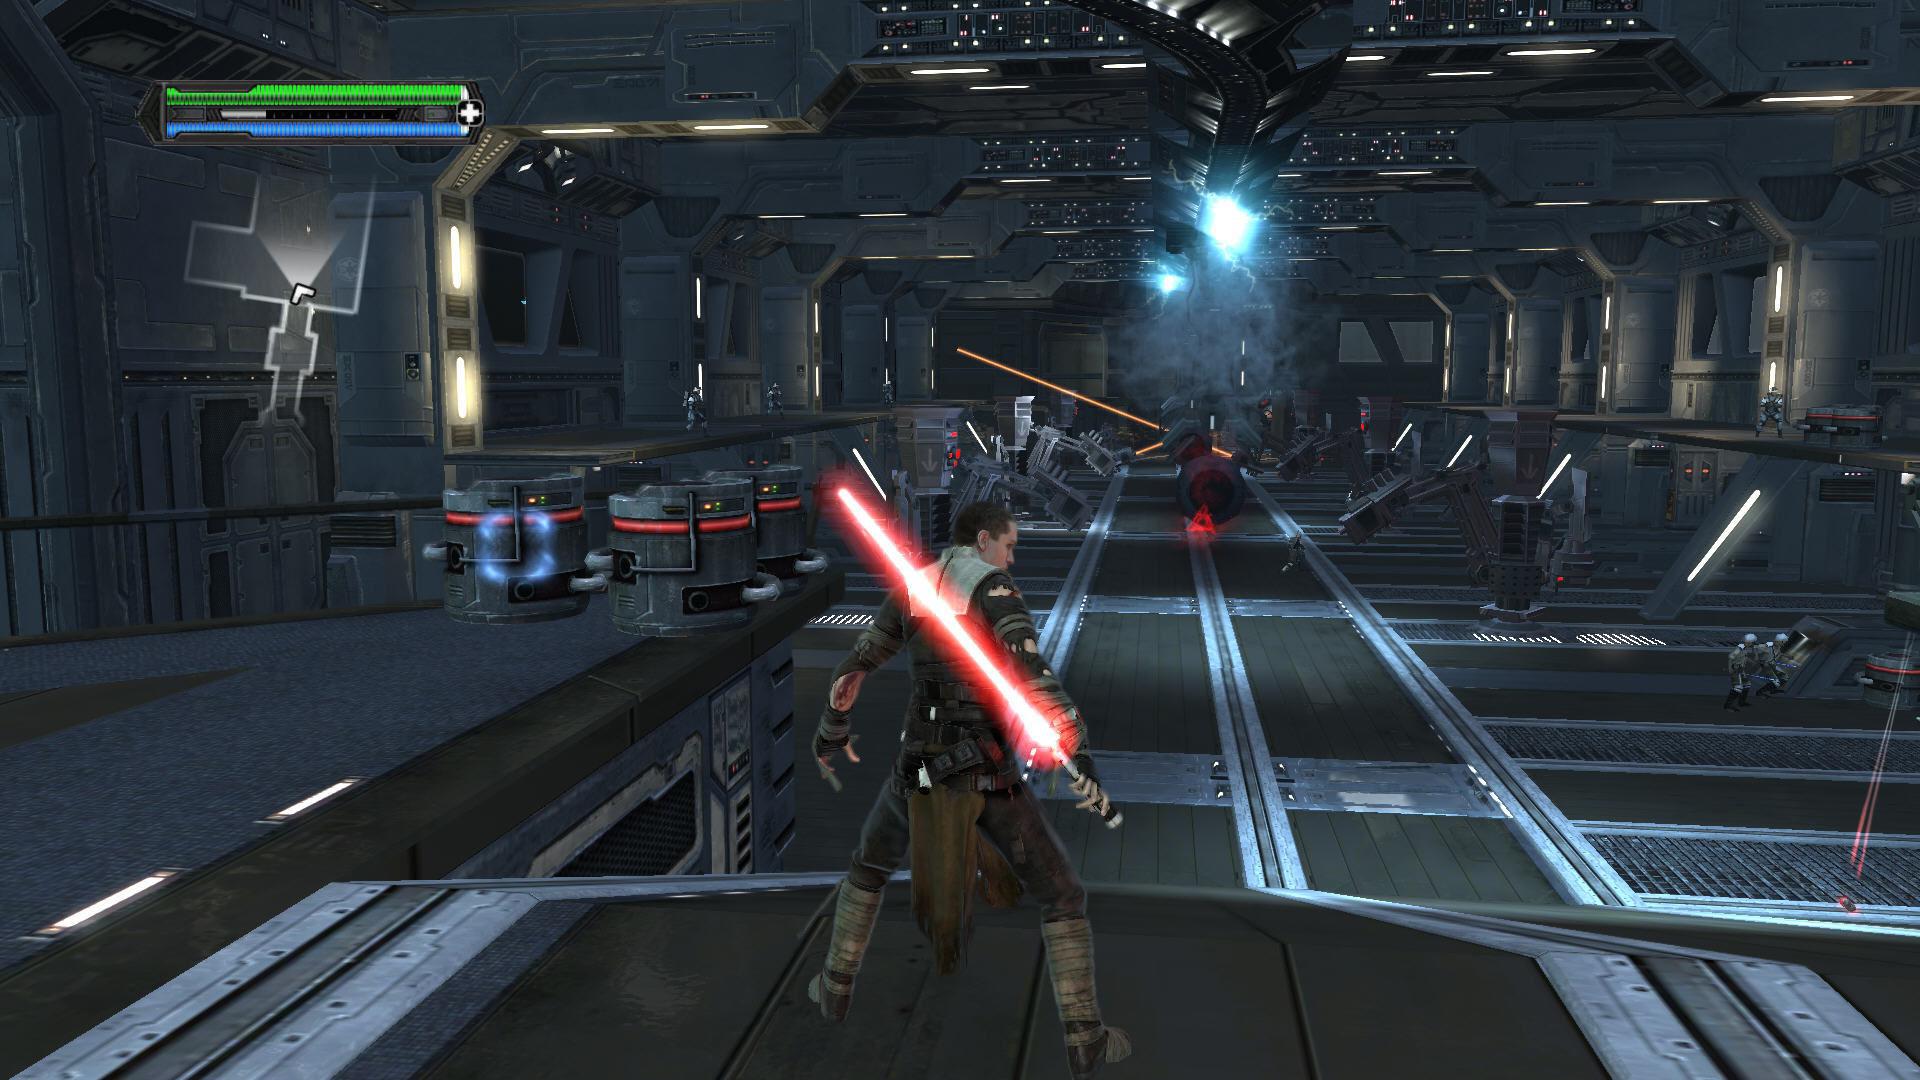 Star wars gameplay. Игра Star Wars unleashed 3. Стар ВАРС the Force unleashed 1. Star Wars: the Force unleashed - Ultimate Sith Edition. Star Wars the Force unleashed 2008.